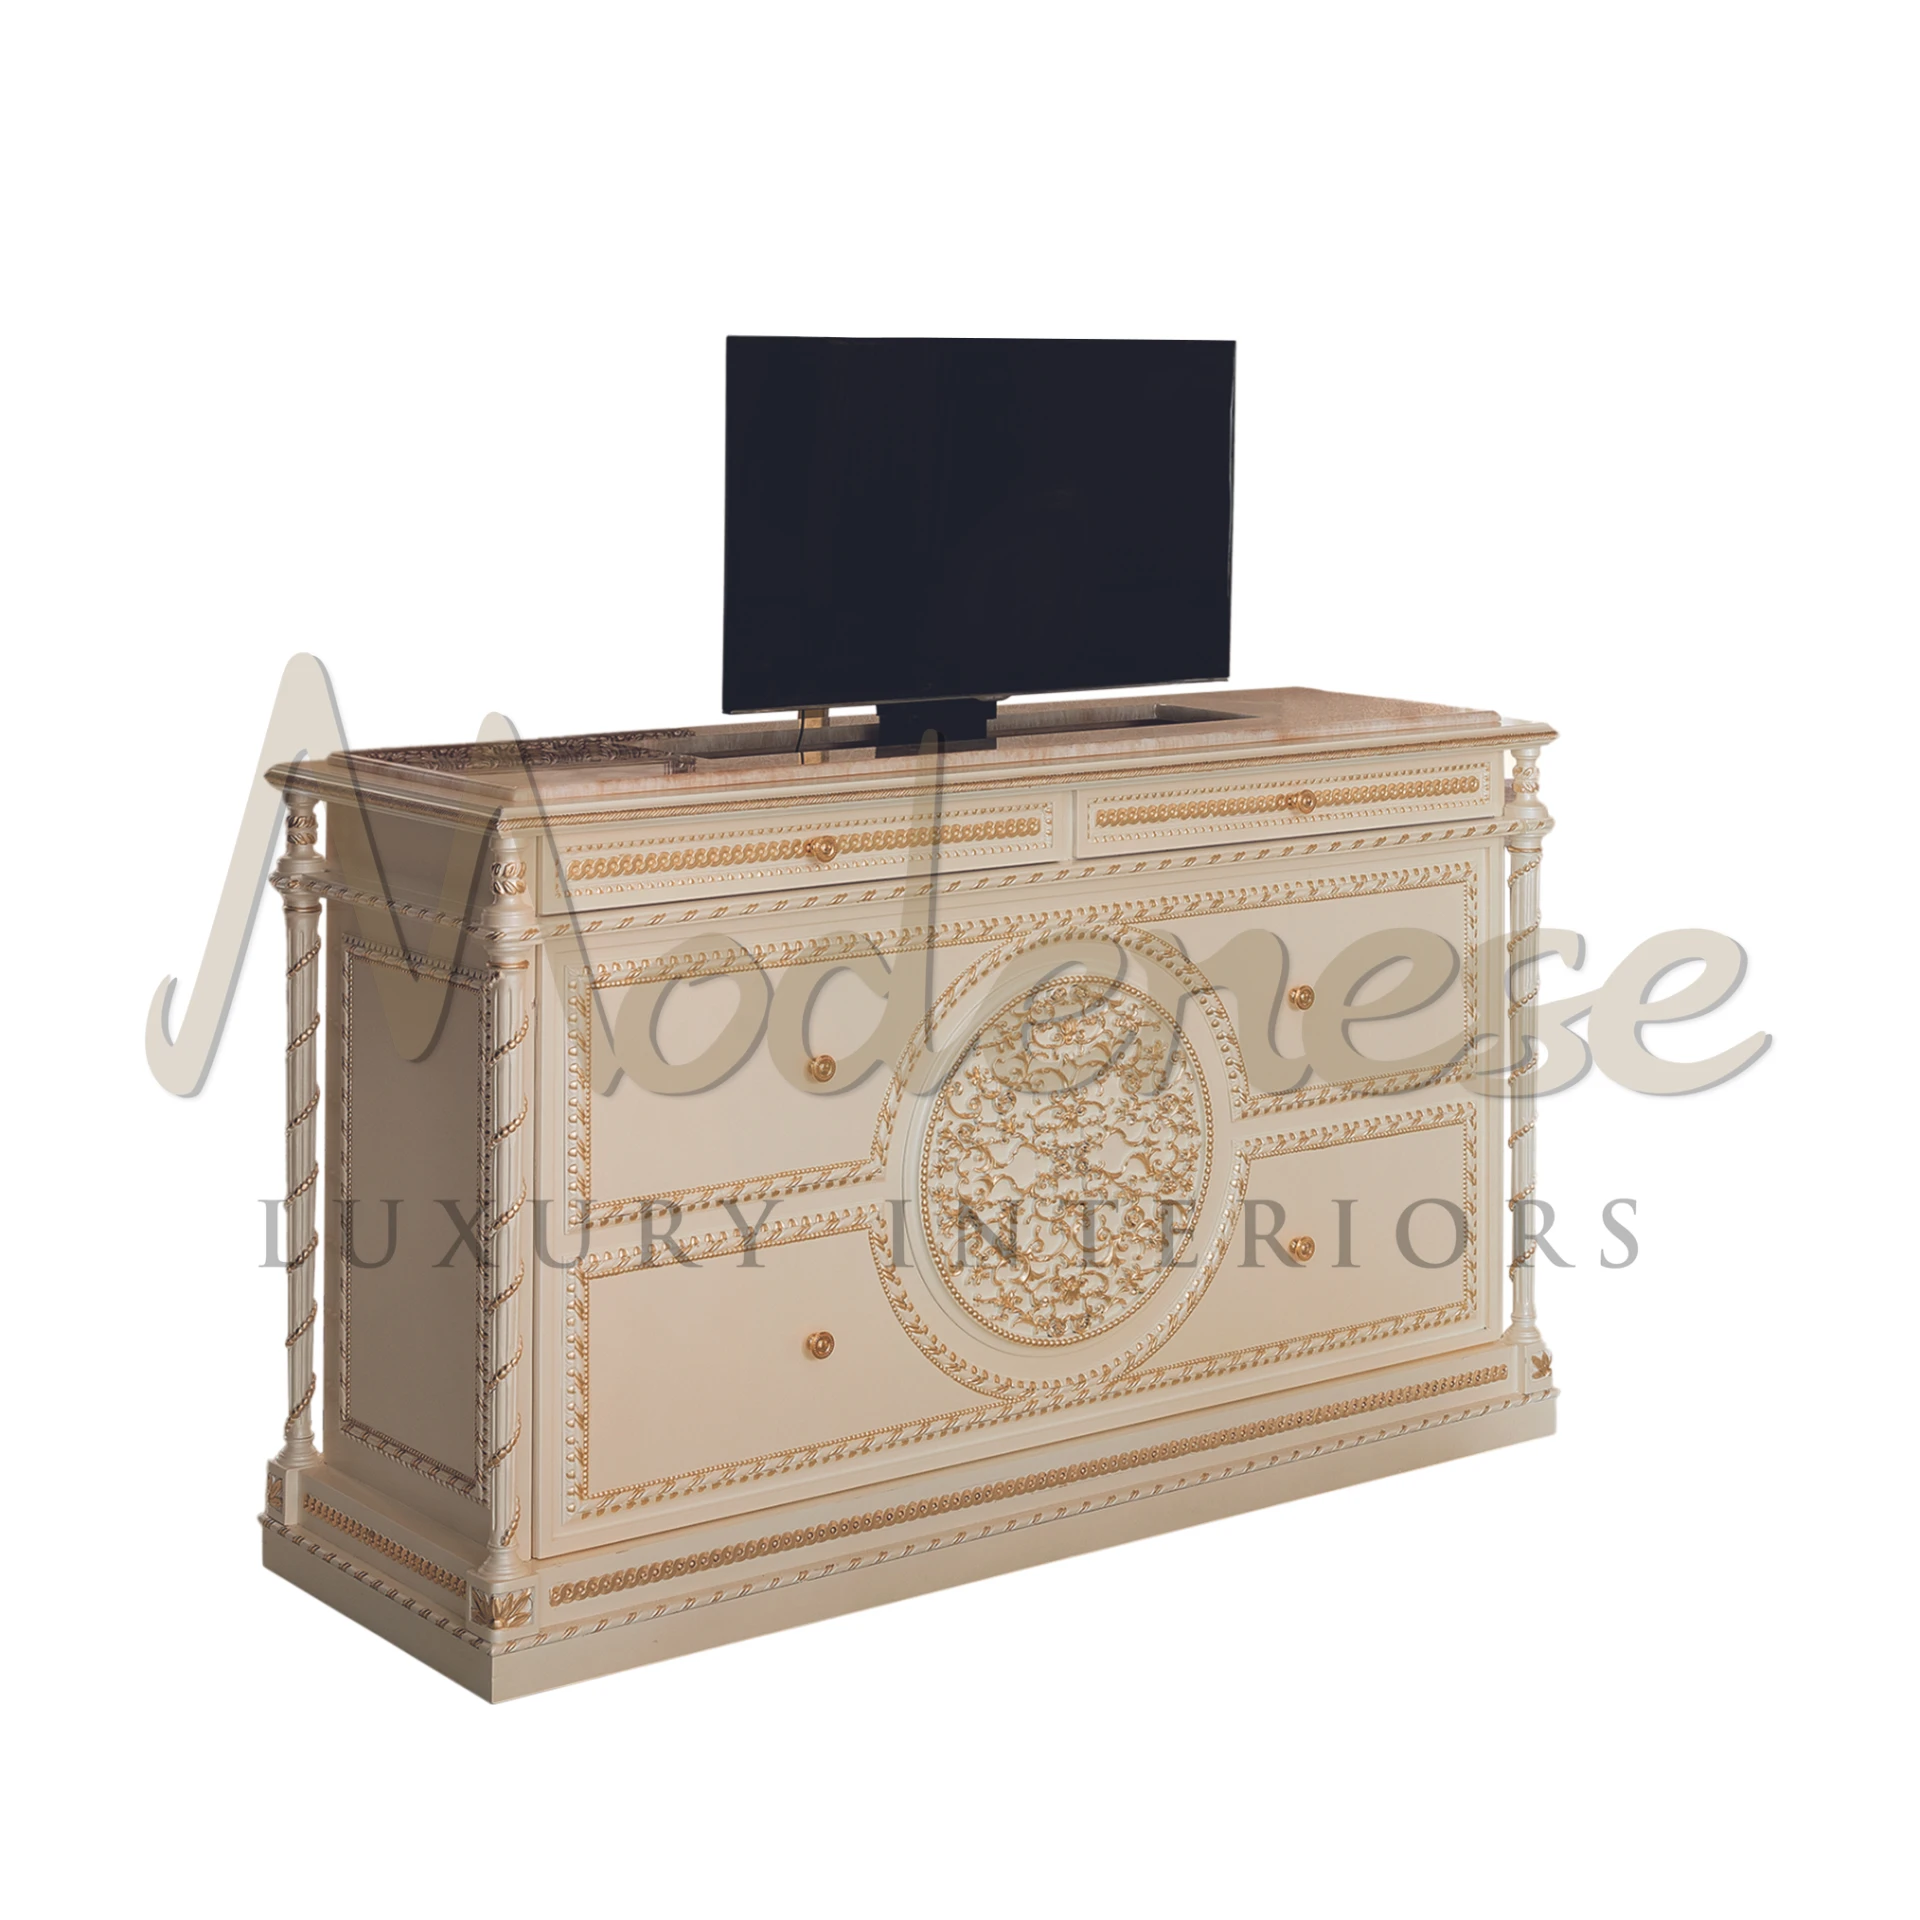 Central TV Stand with mechanism, solid wood, Italian craftsmanship for a luxury entertainment piece in classical baroque style.
